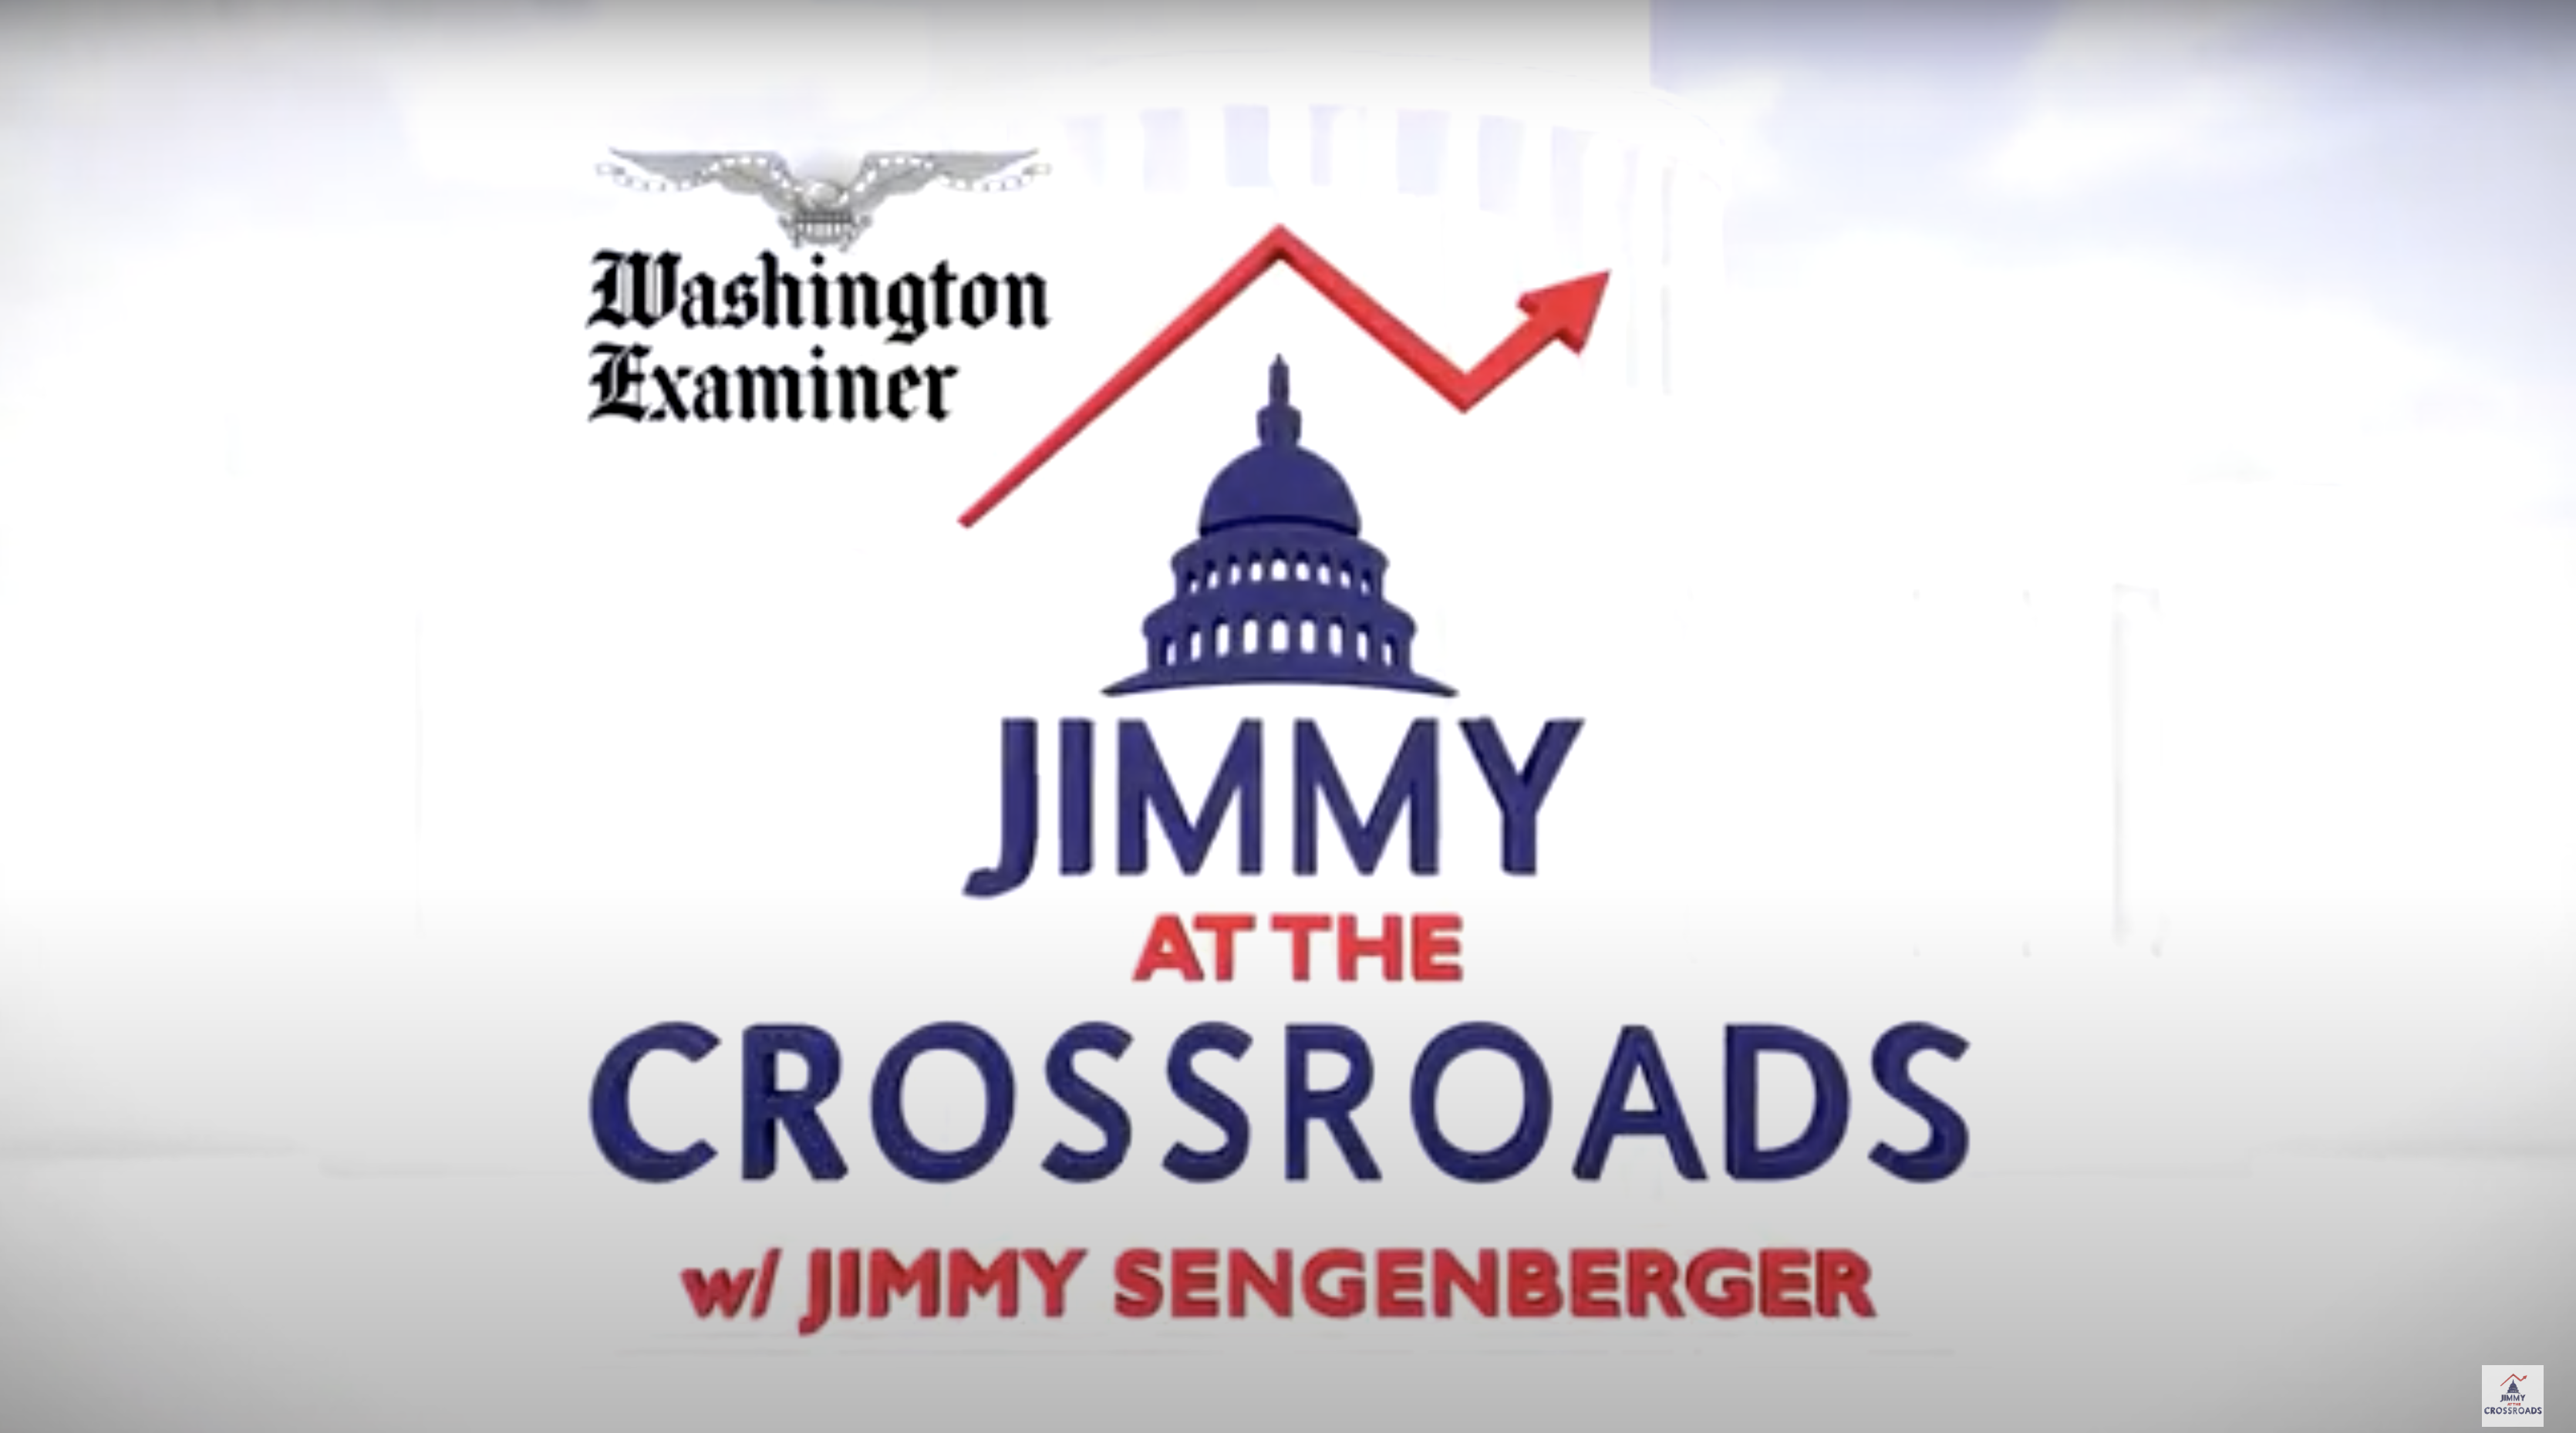 Jimmy at the Crossroads logo